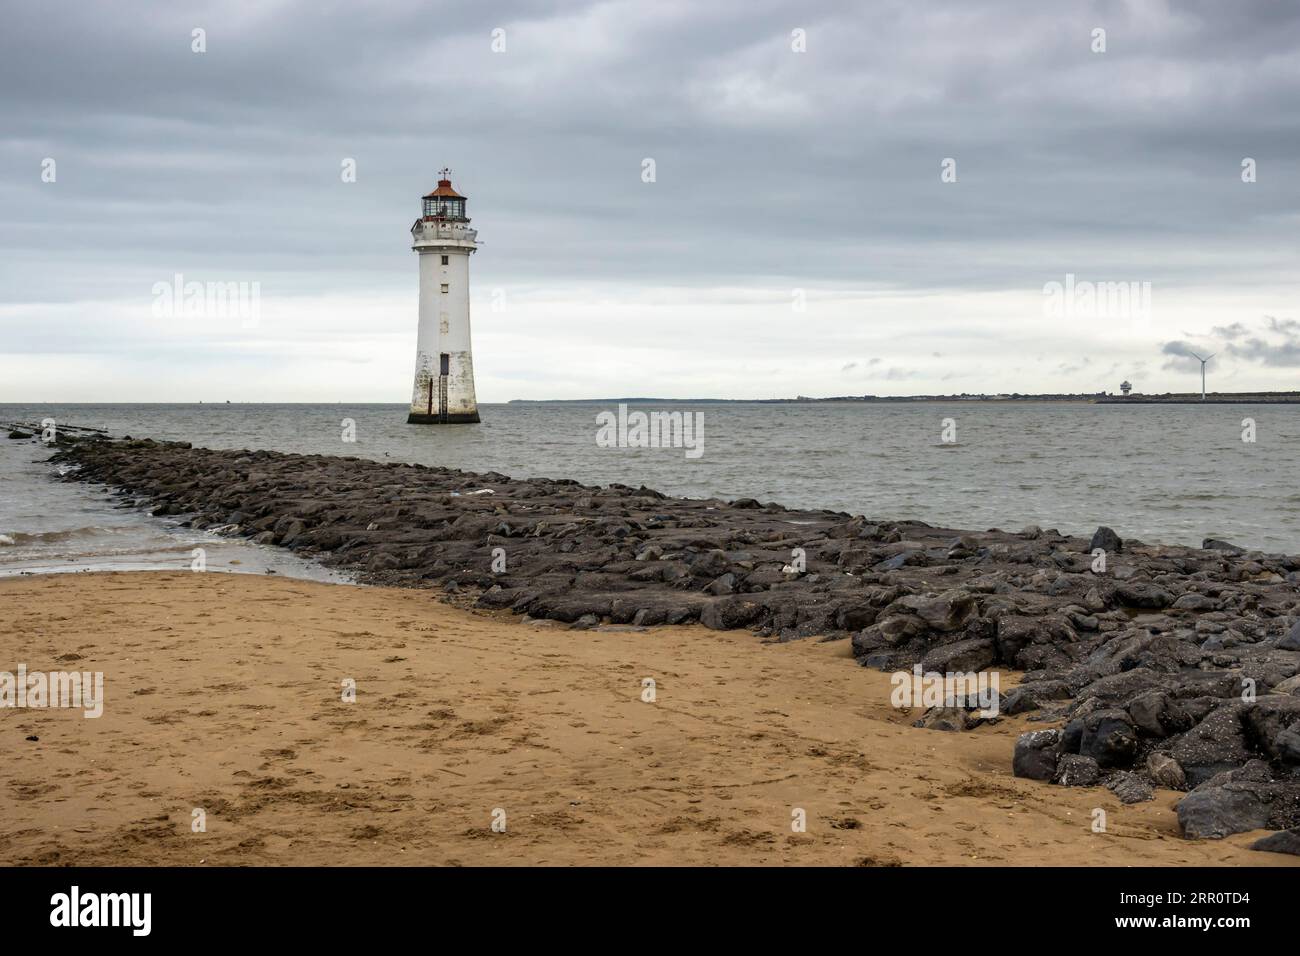 New Brighton Lighthouse or Perch Rock Lighthouse, a decommissioned lighthouse situated at the confluence of the River Mersey and Liverpool Bay. Stock Photo